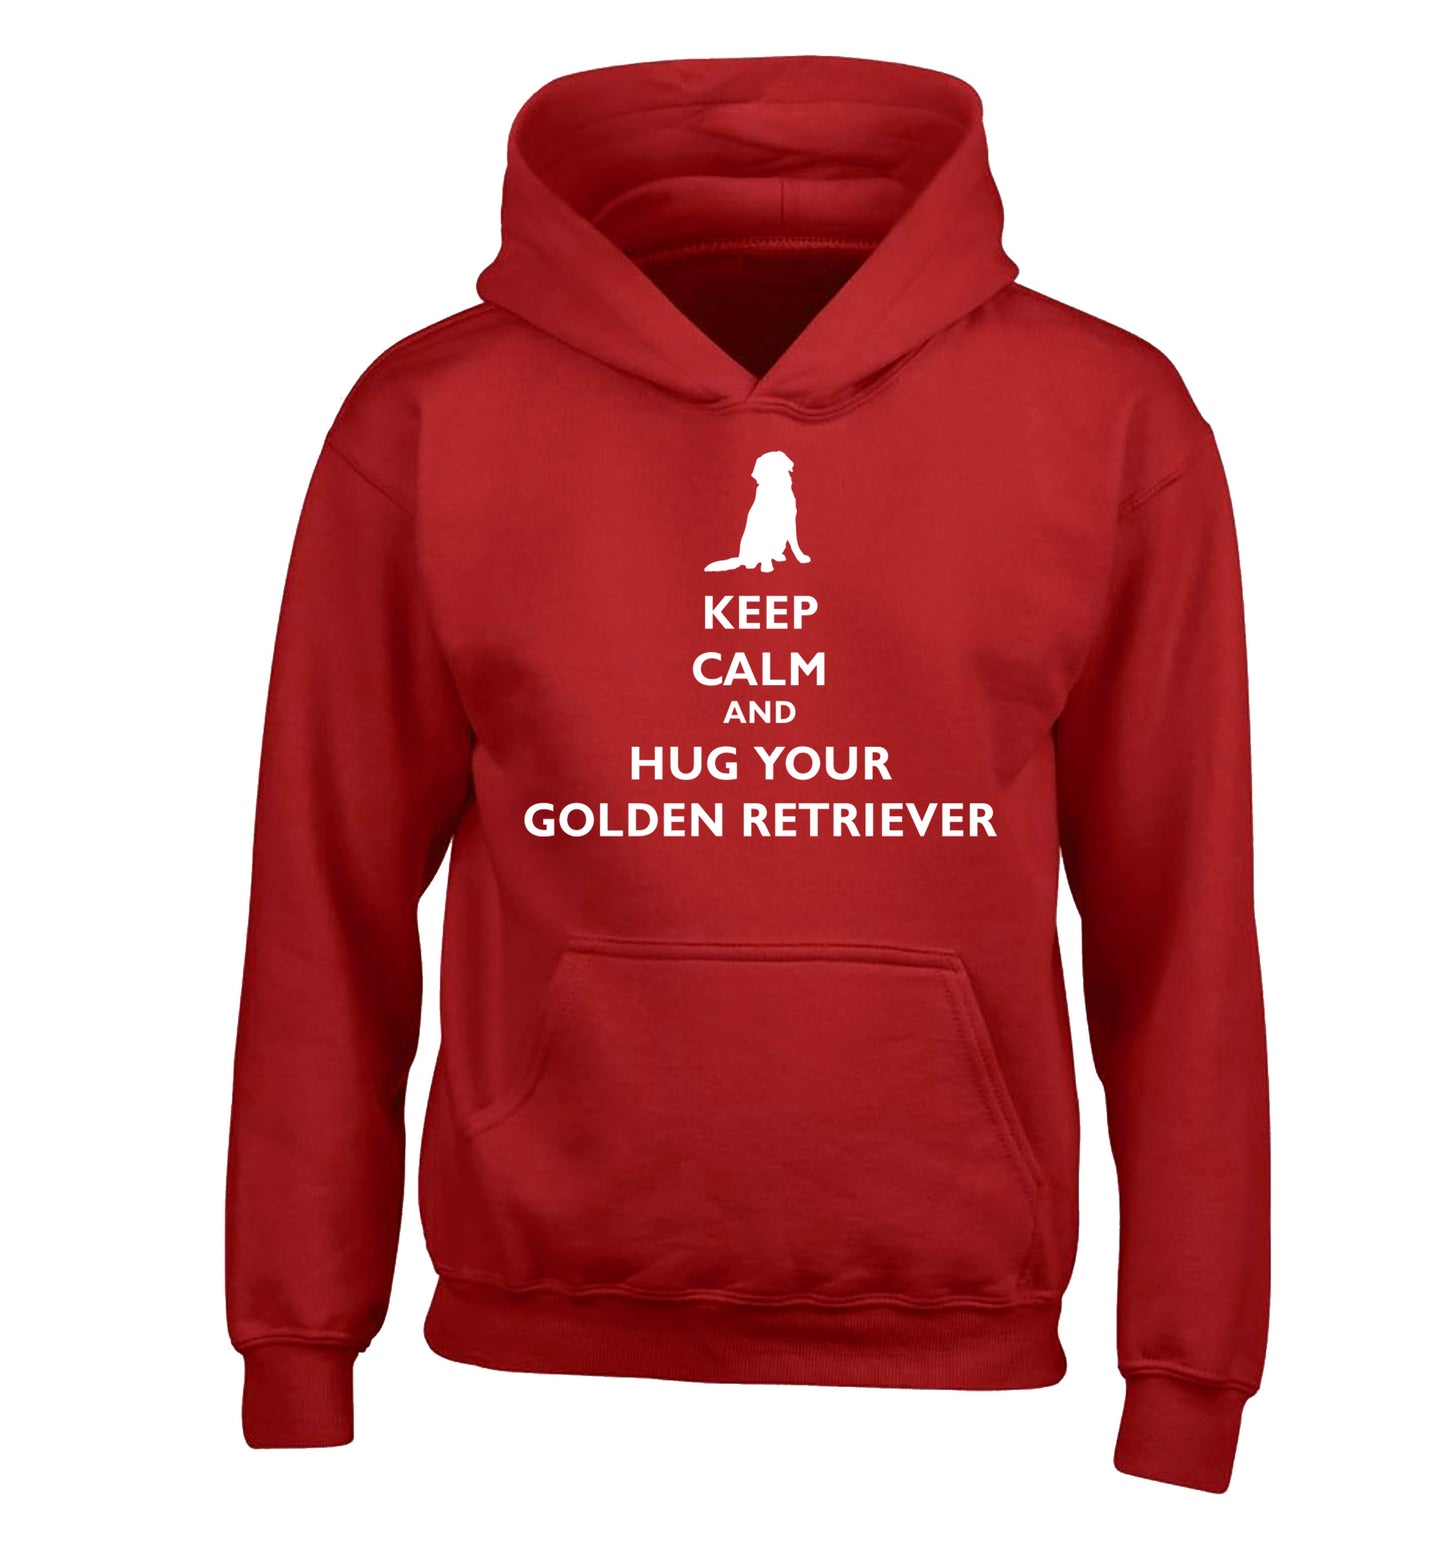 Keep calm and hug your golden retriever children's red hoodie 12-13 Years